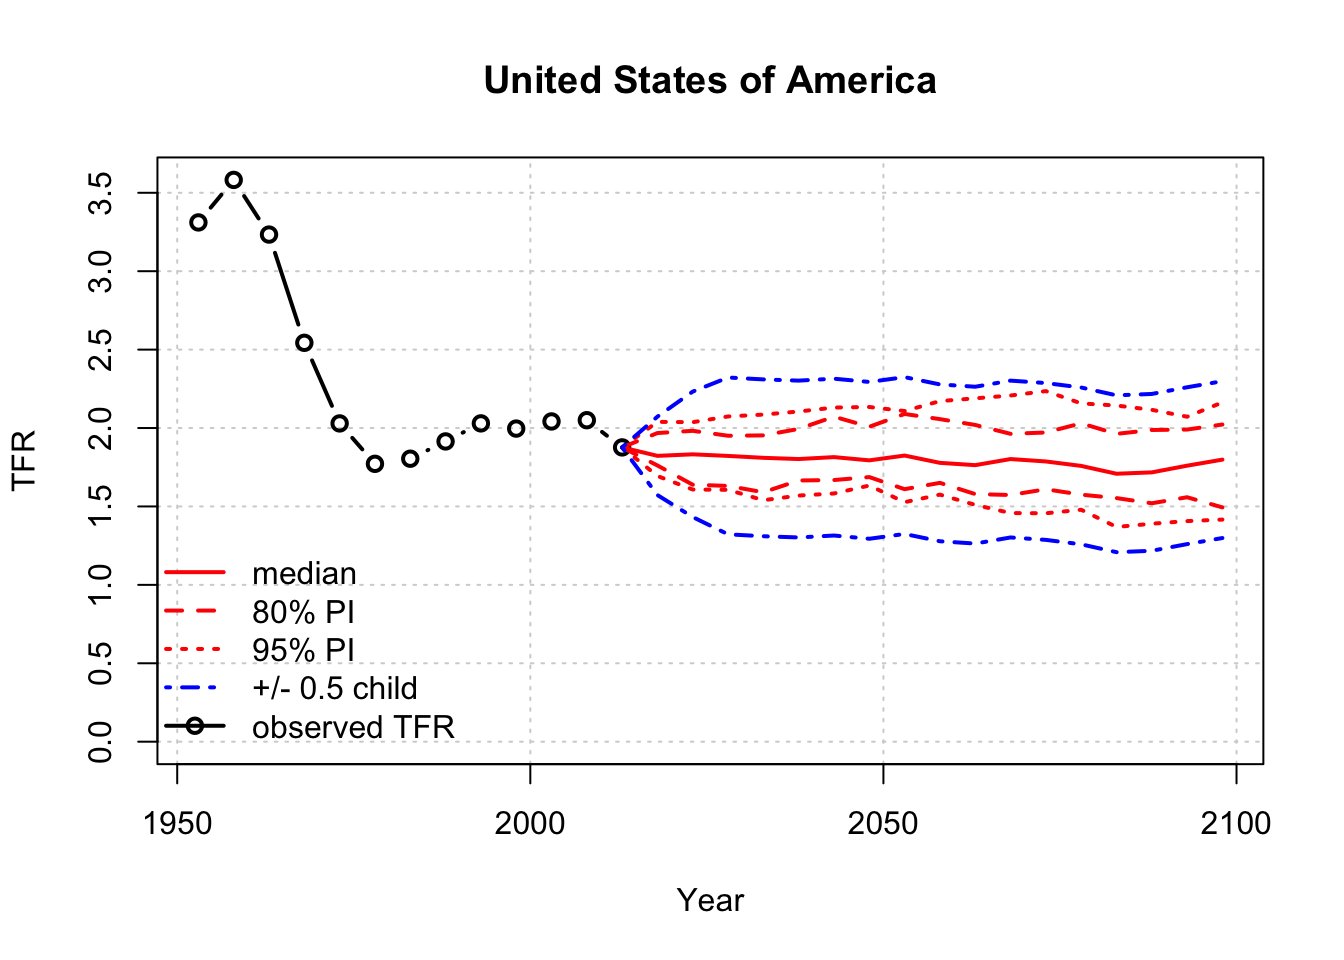 Climate Change and Population Modeling in R